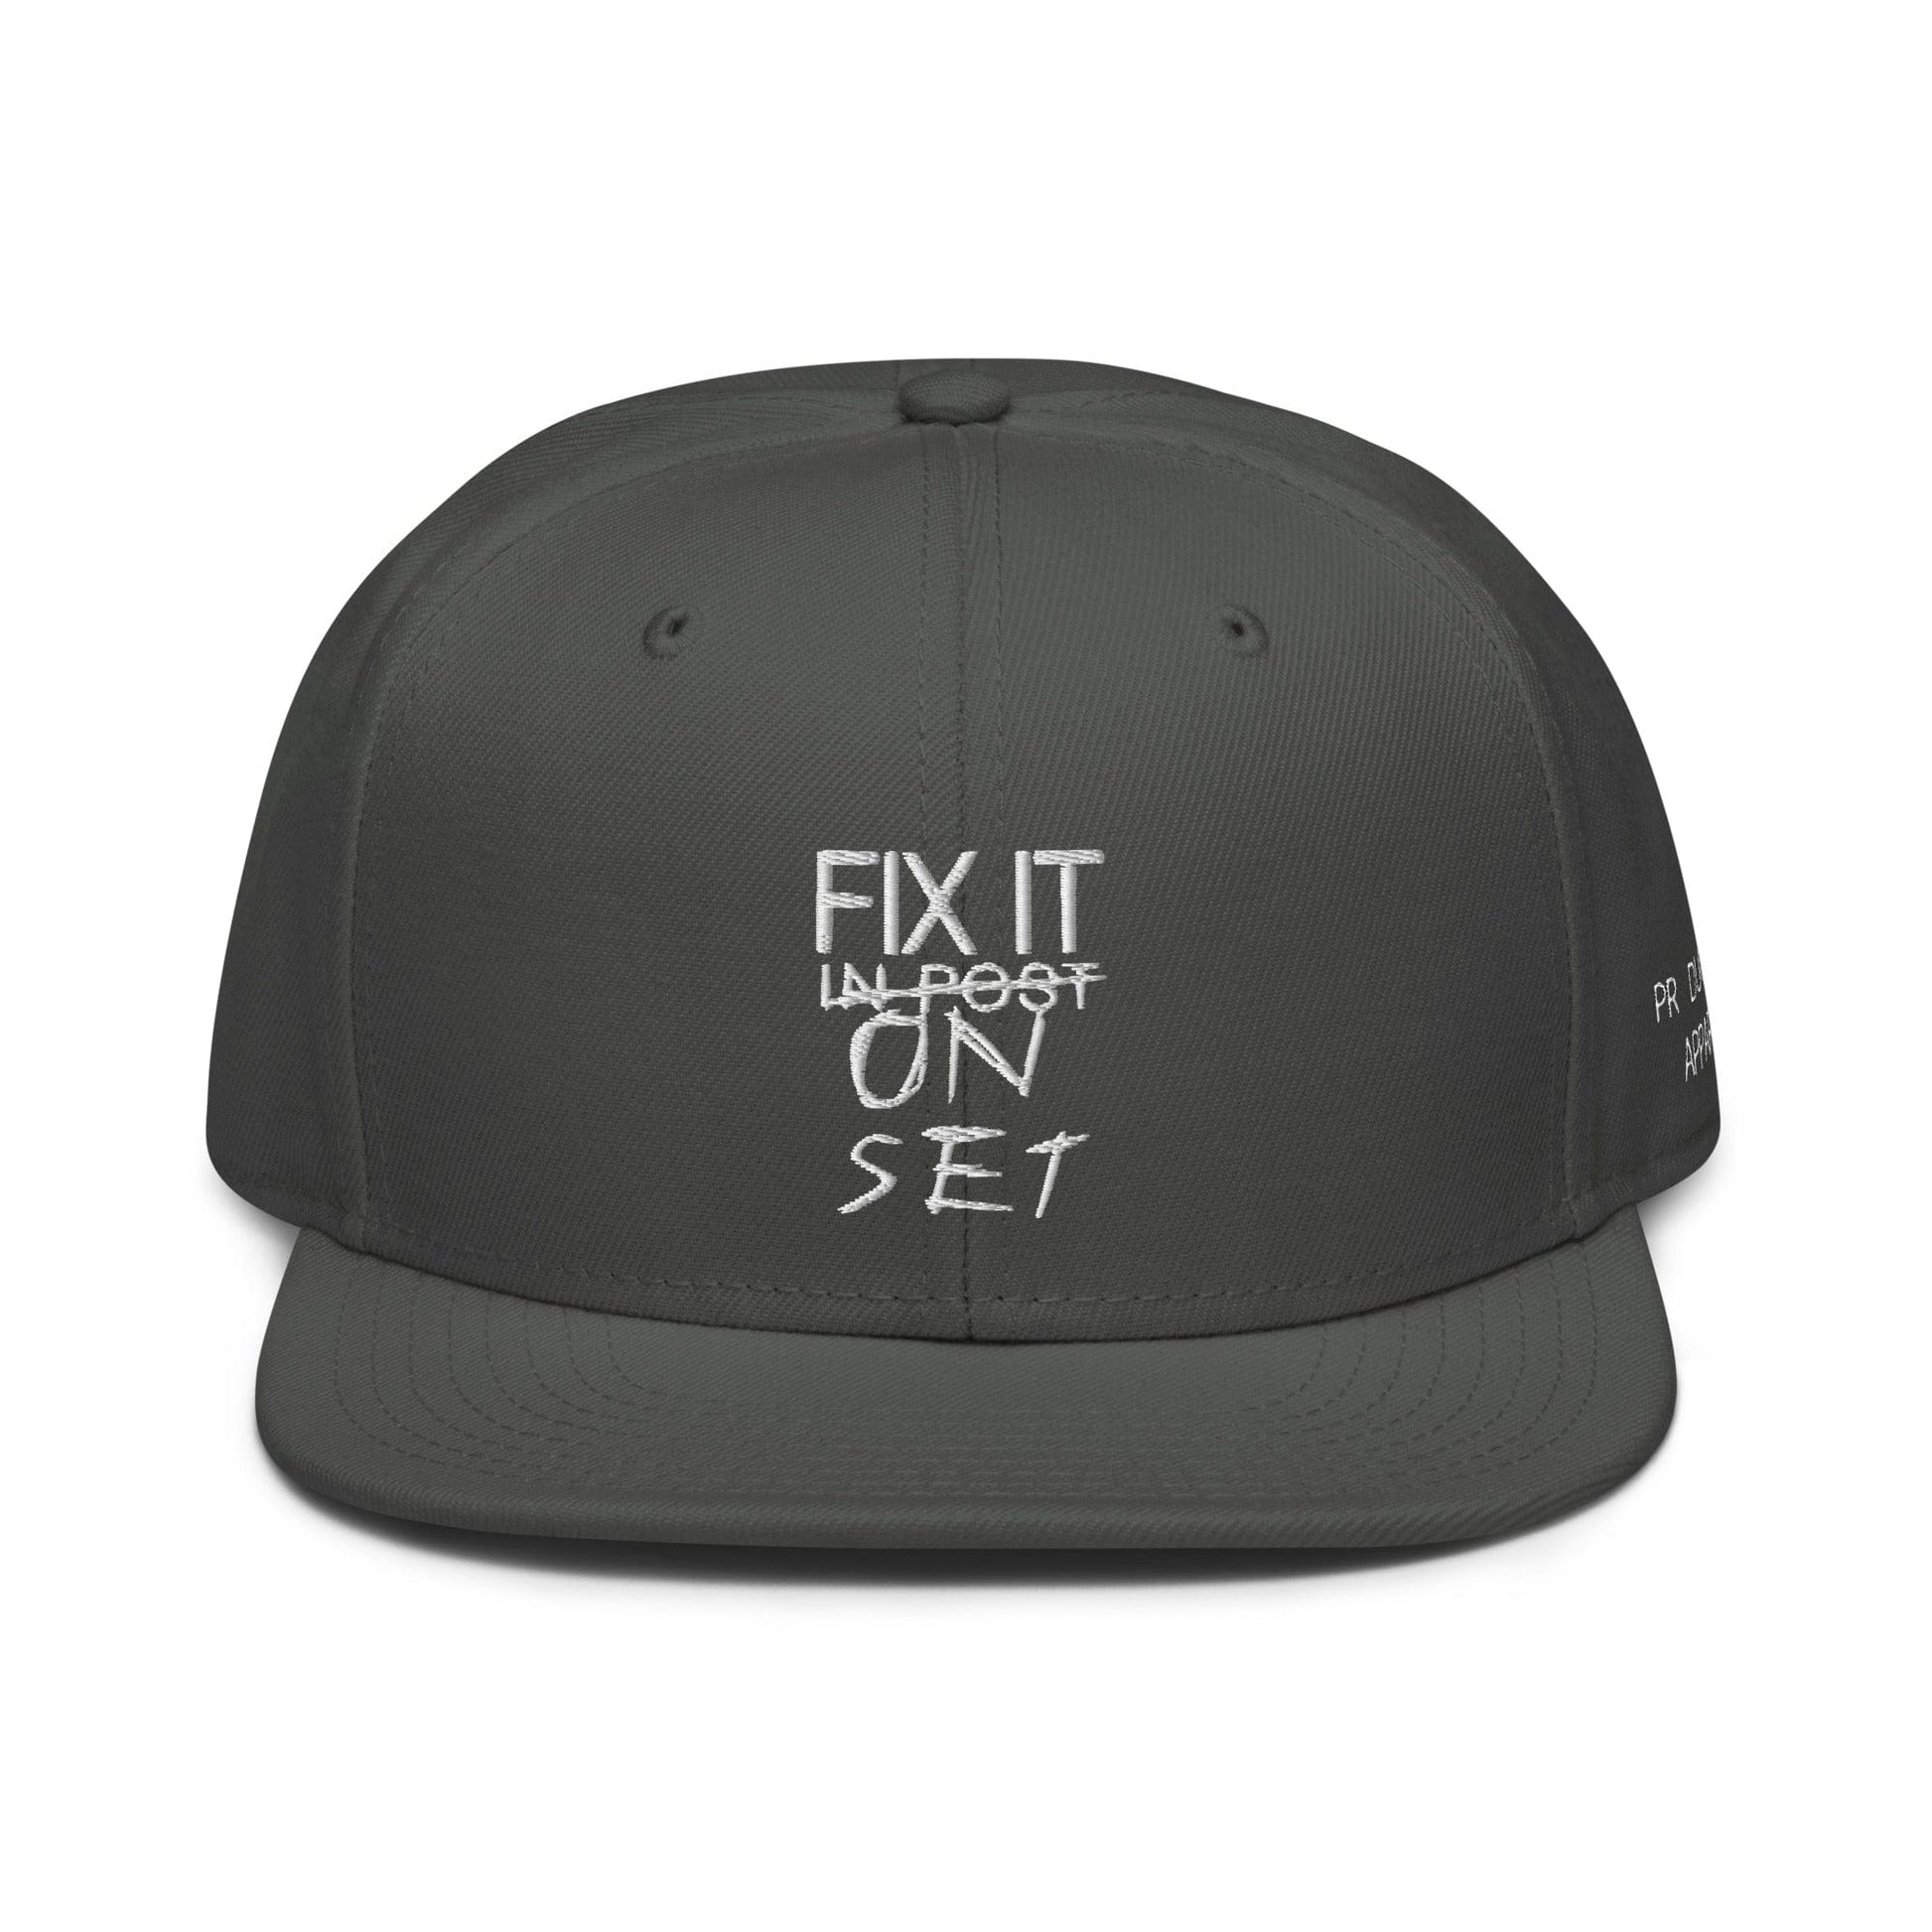 Production Apparel Fix It On Set Hat Charcoal gray